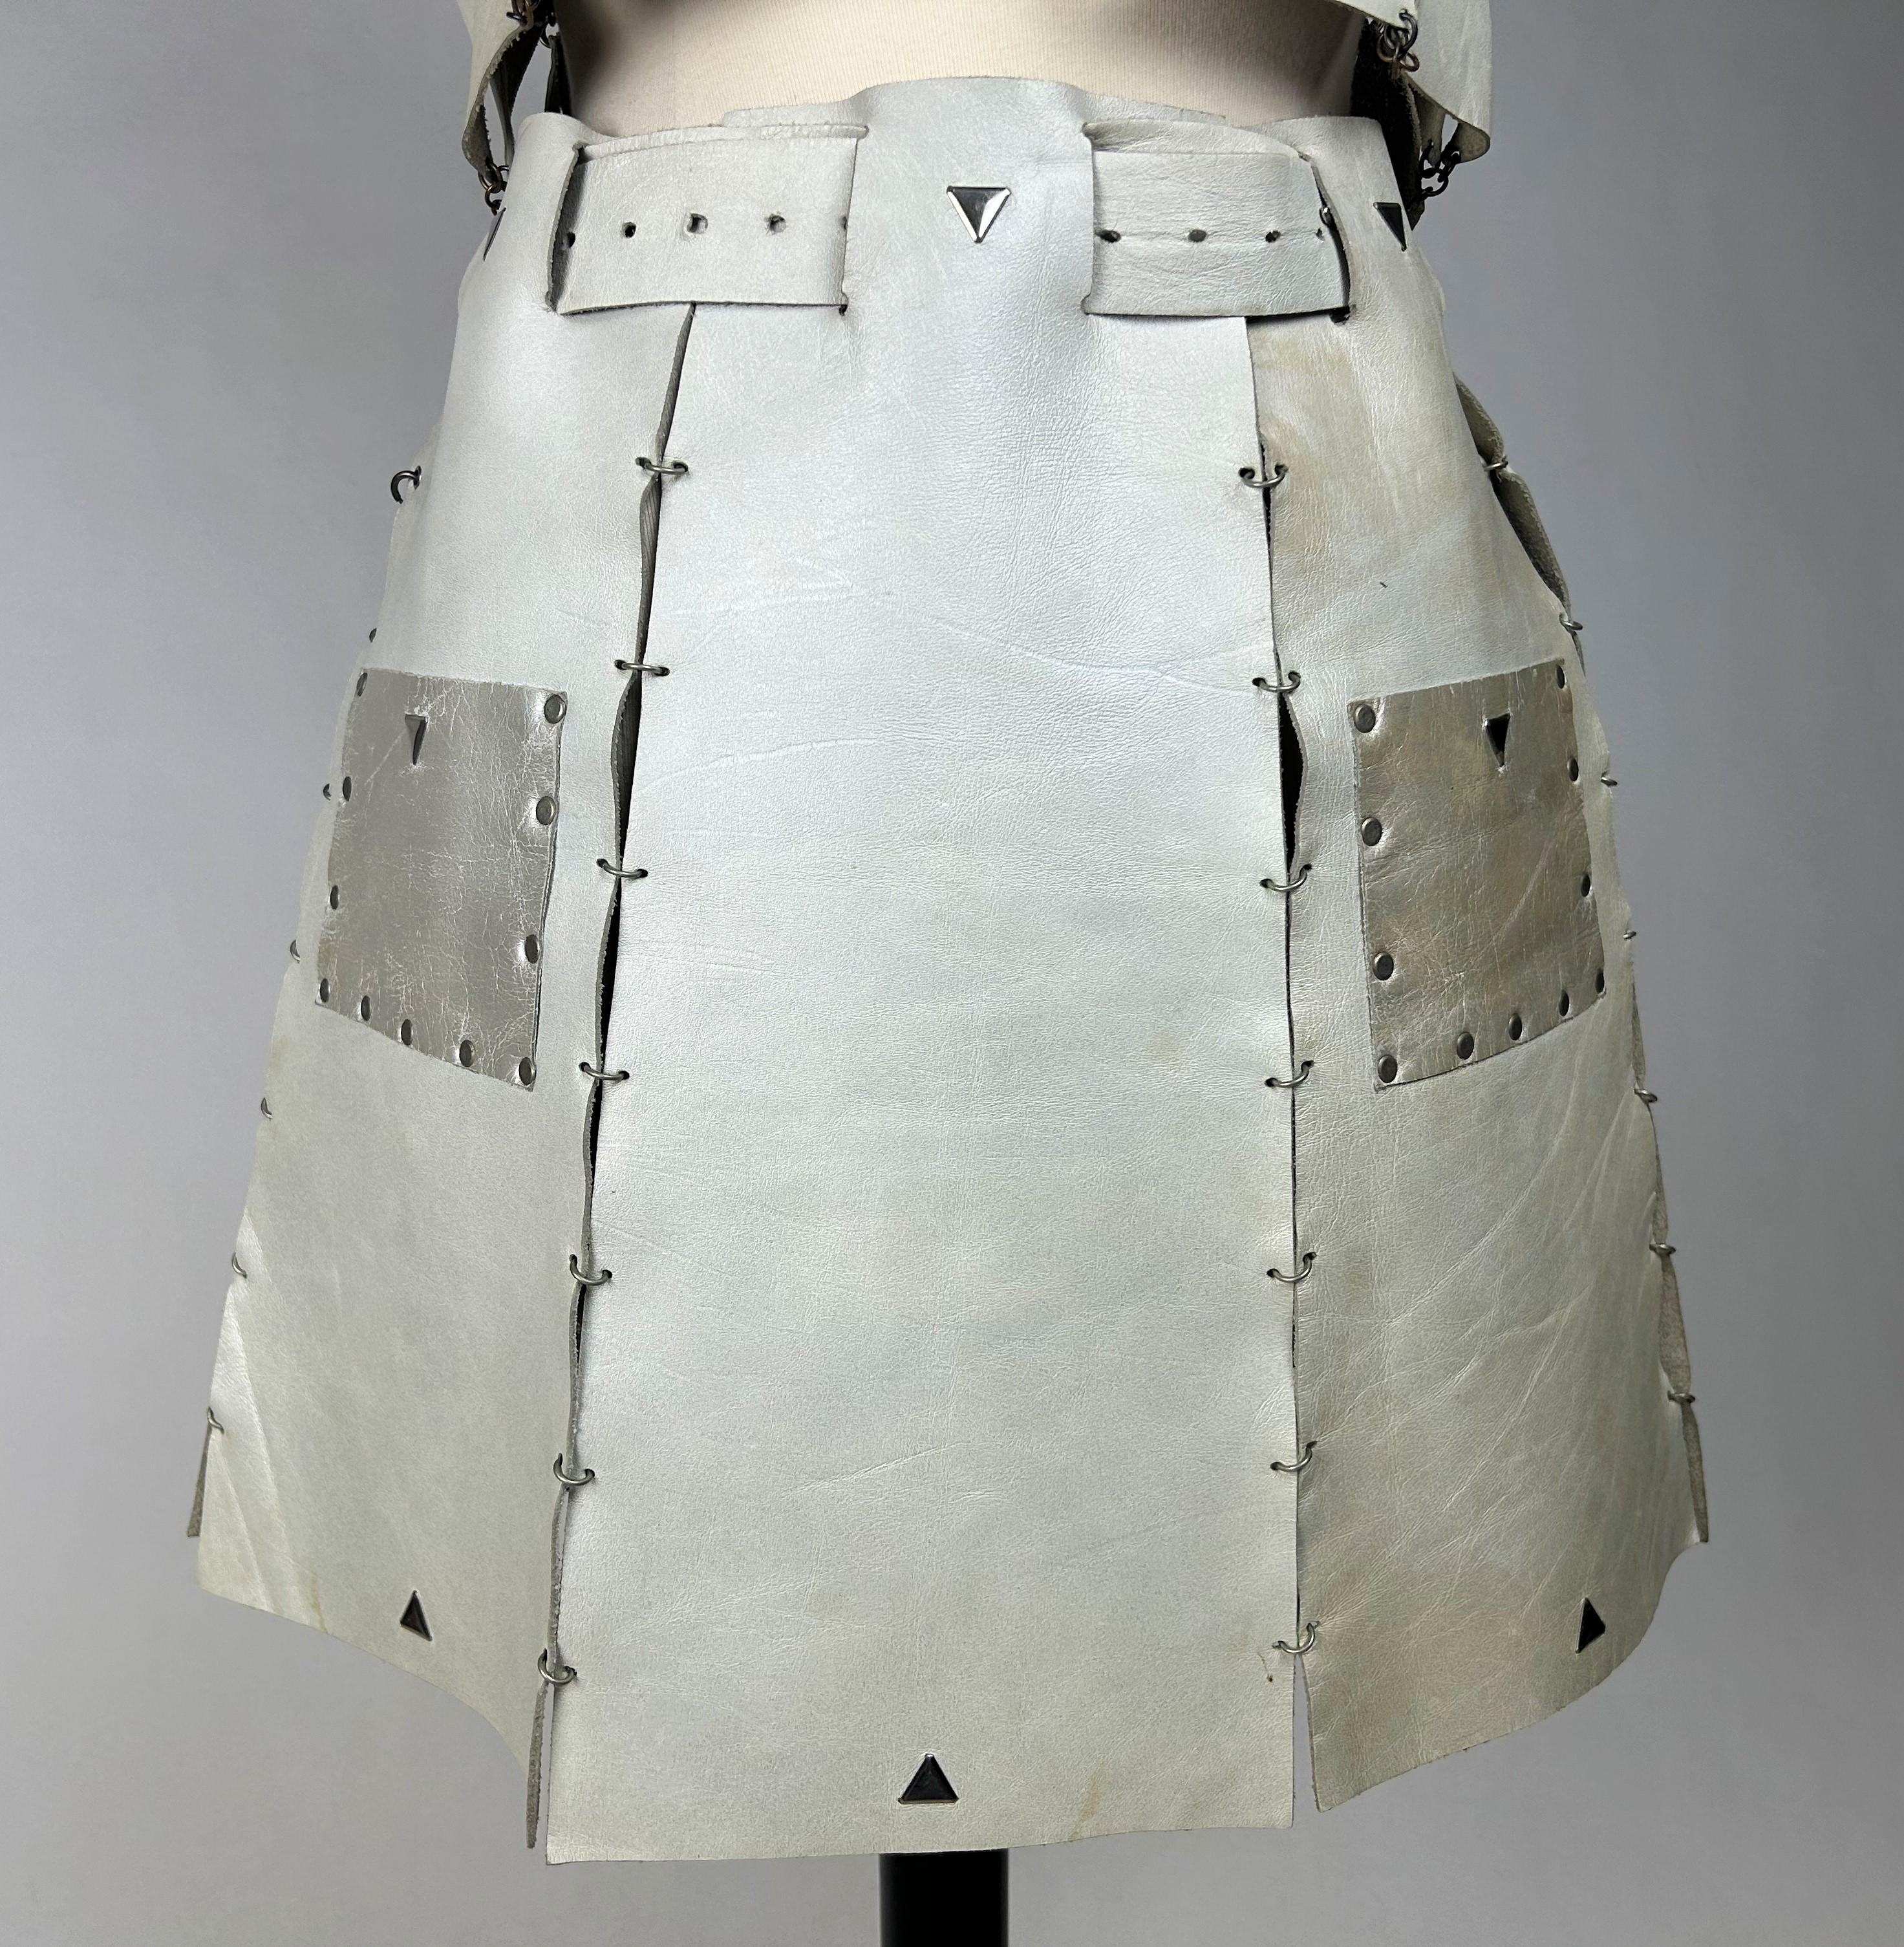 A Couture Leather skirt and top set by Paco Rabanne - Paris 1967 For Sale 2